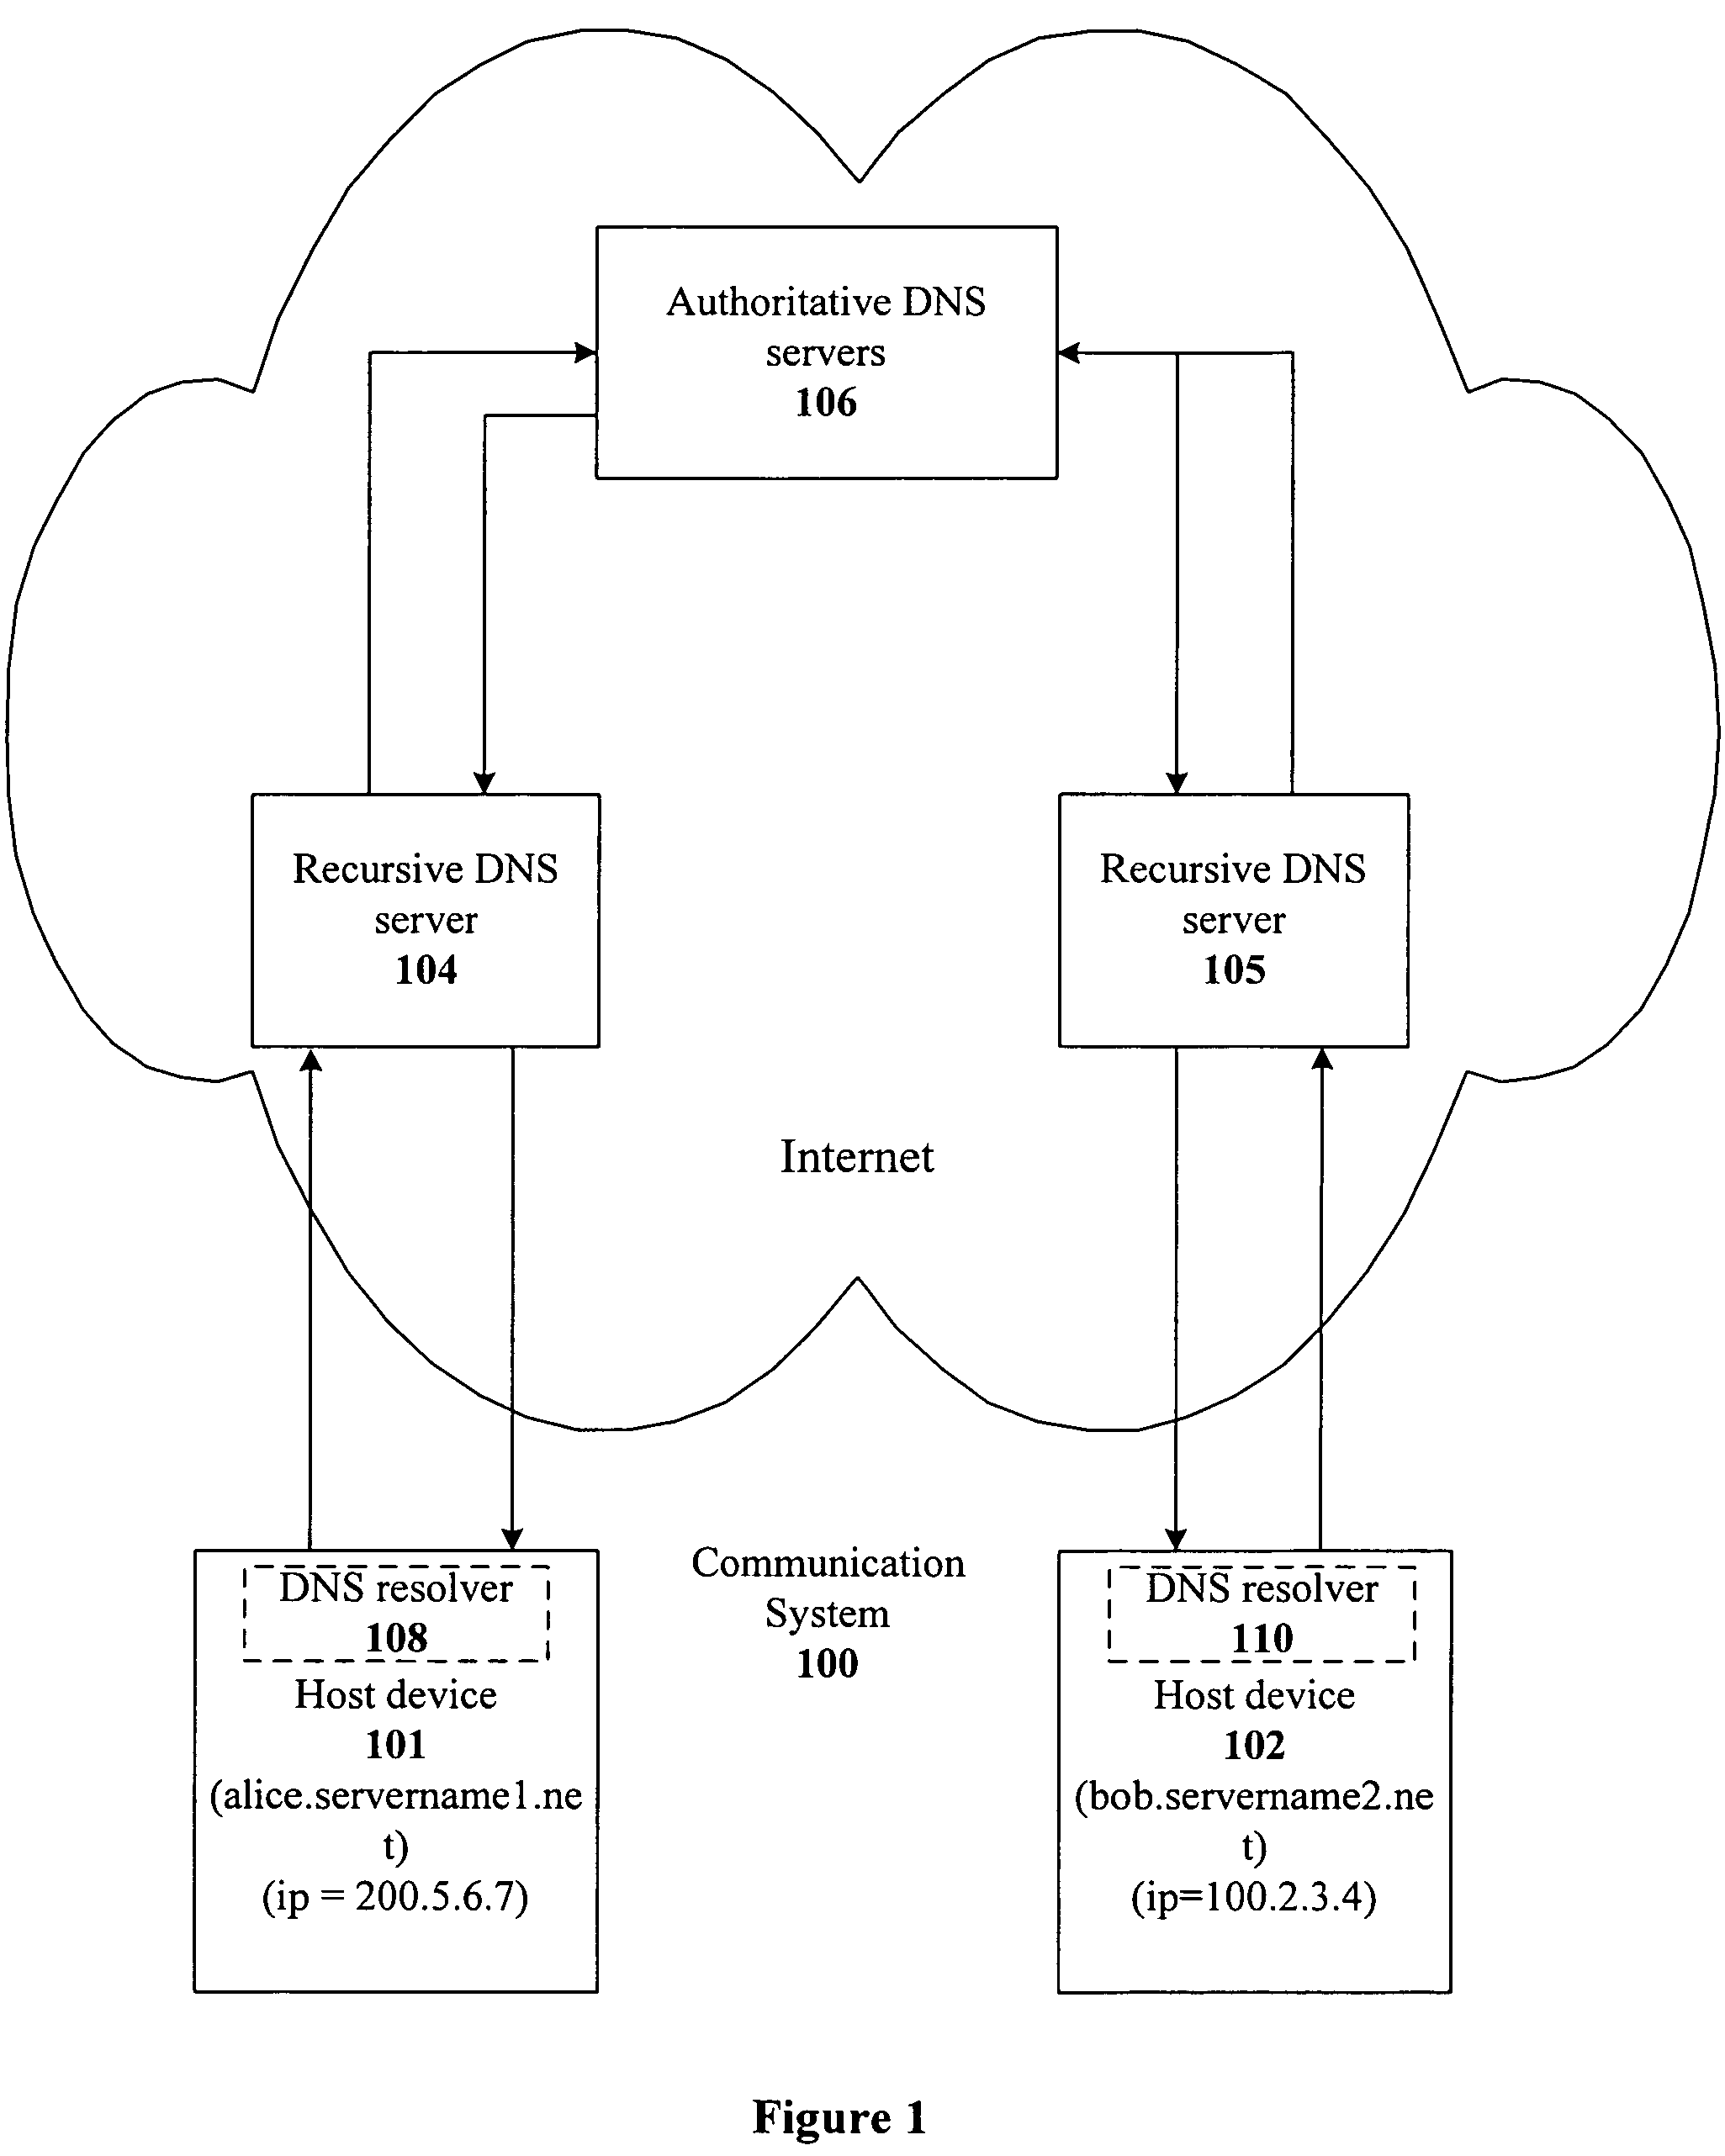 Communication using private IP addresses of local networks